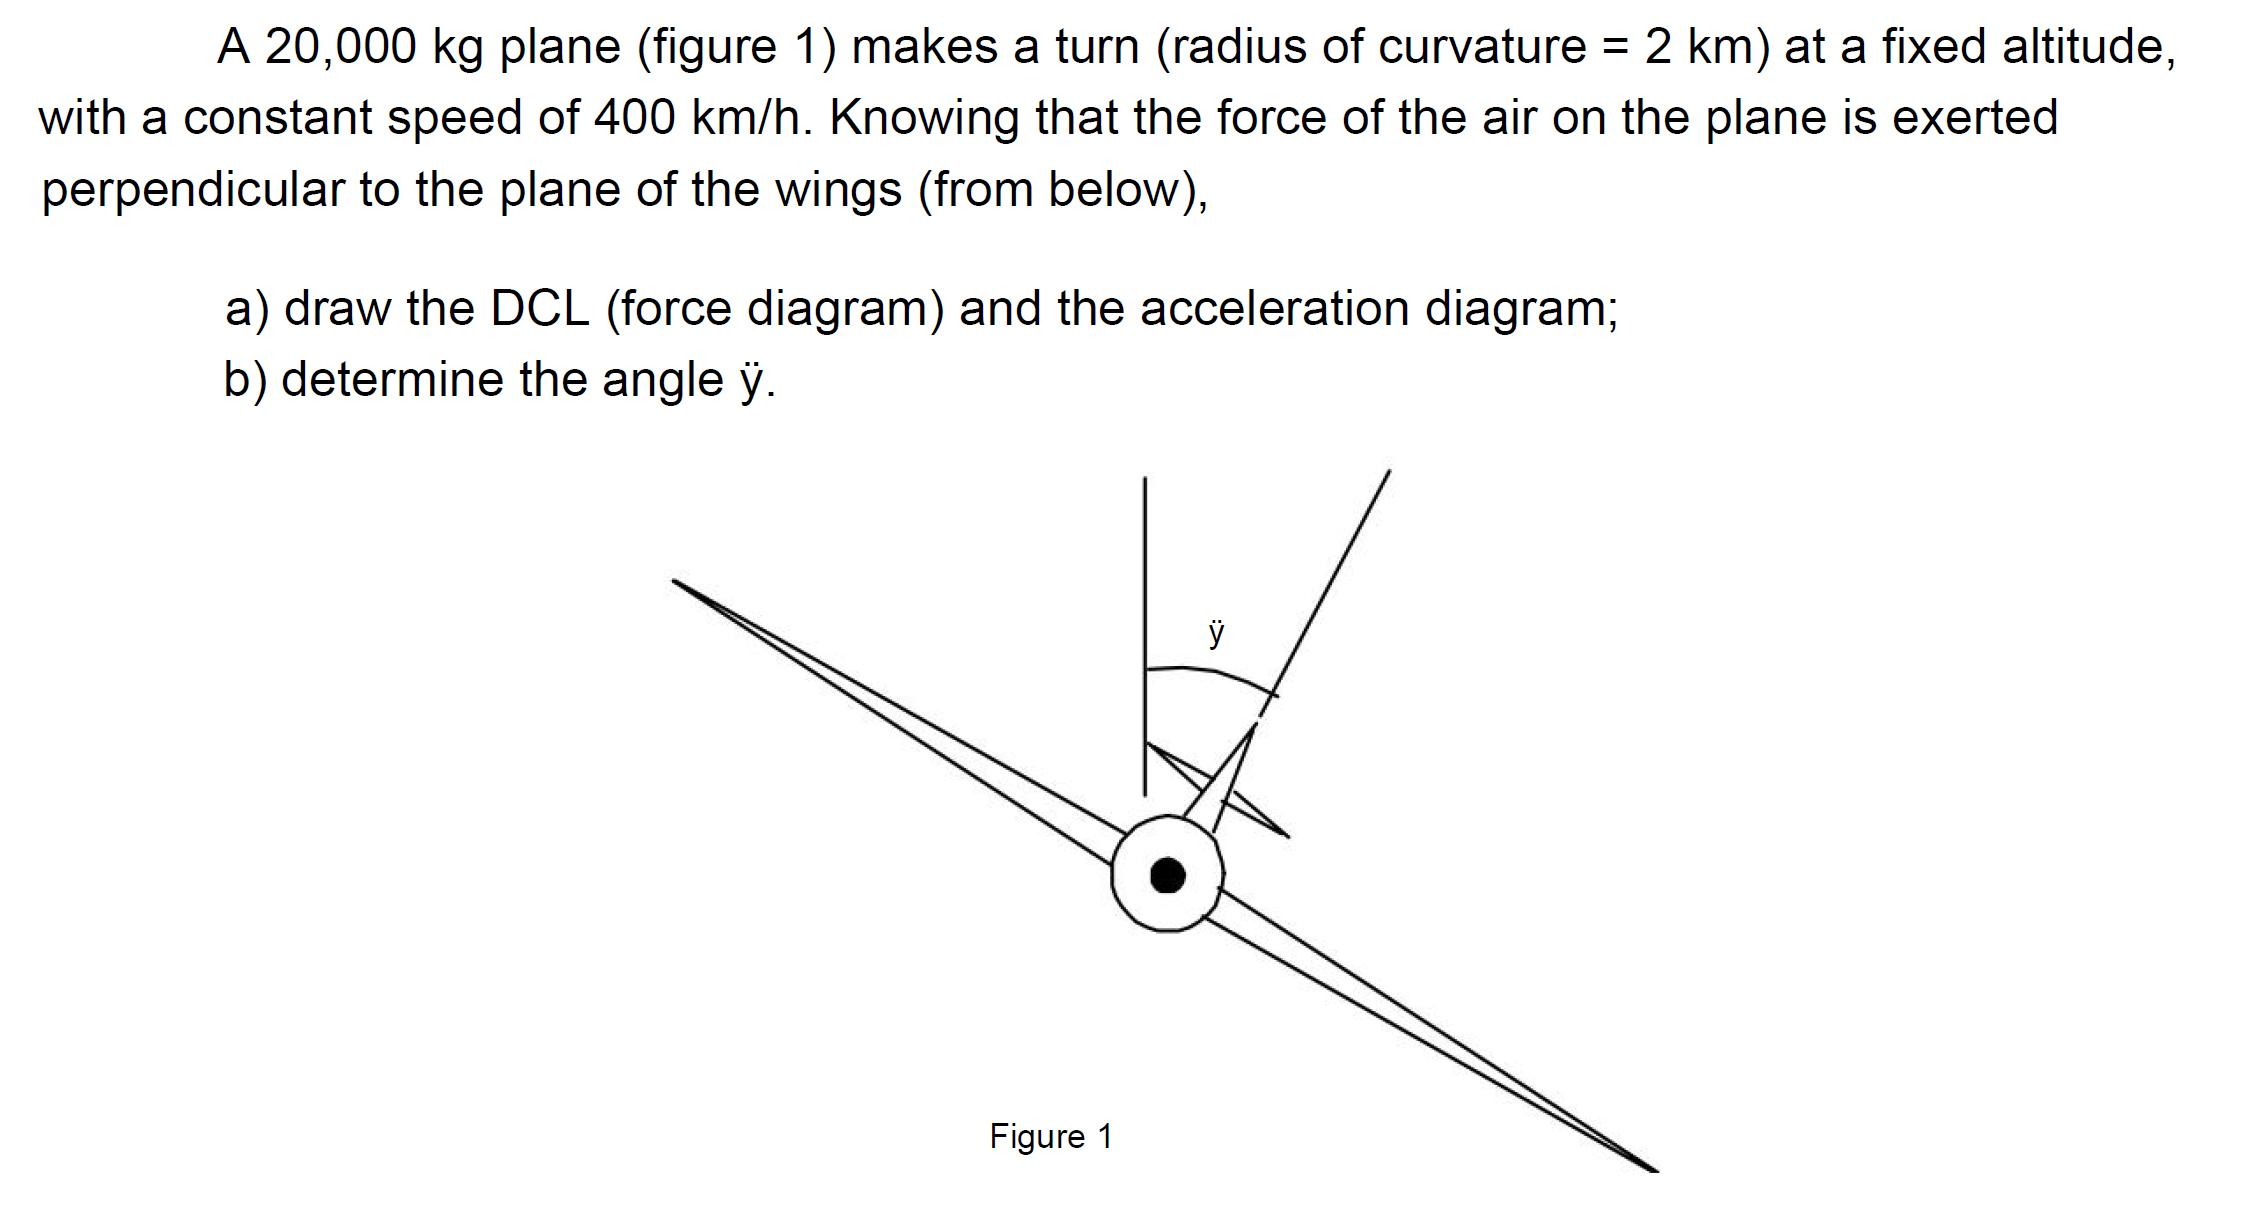 A 20,000 kg plane (figure 1) makes a turn (radius of curvature = 2 km) at a fixed altitude, with a constant